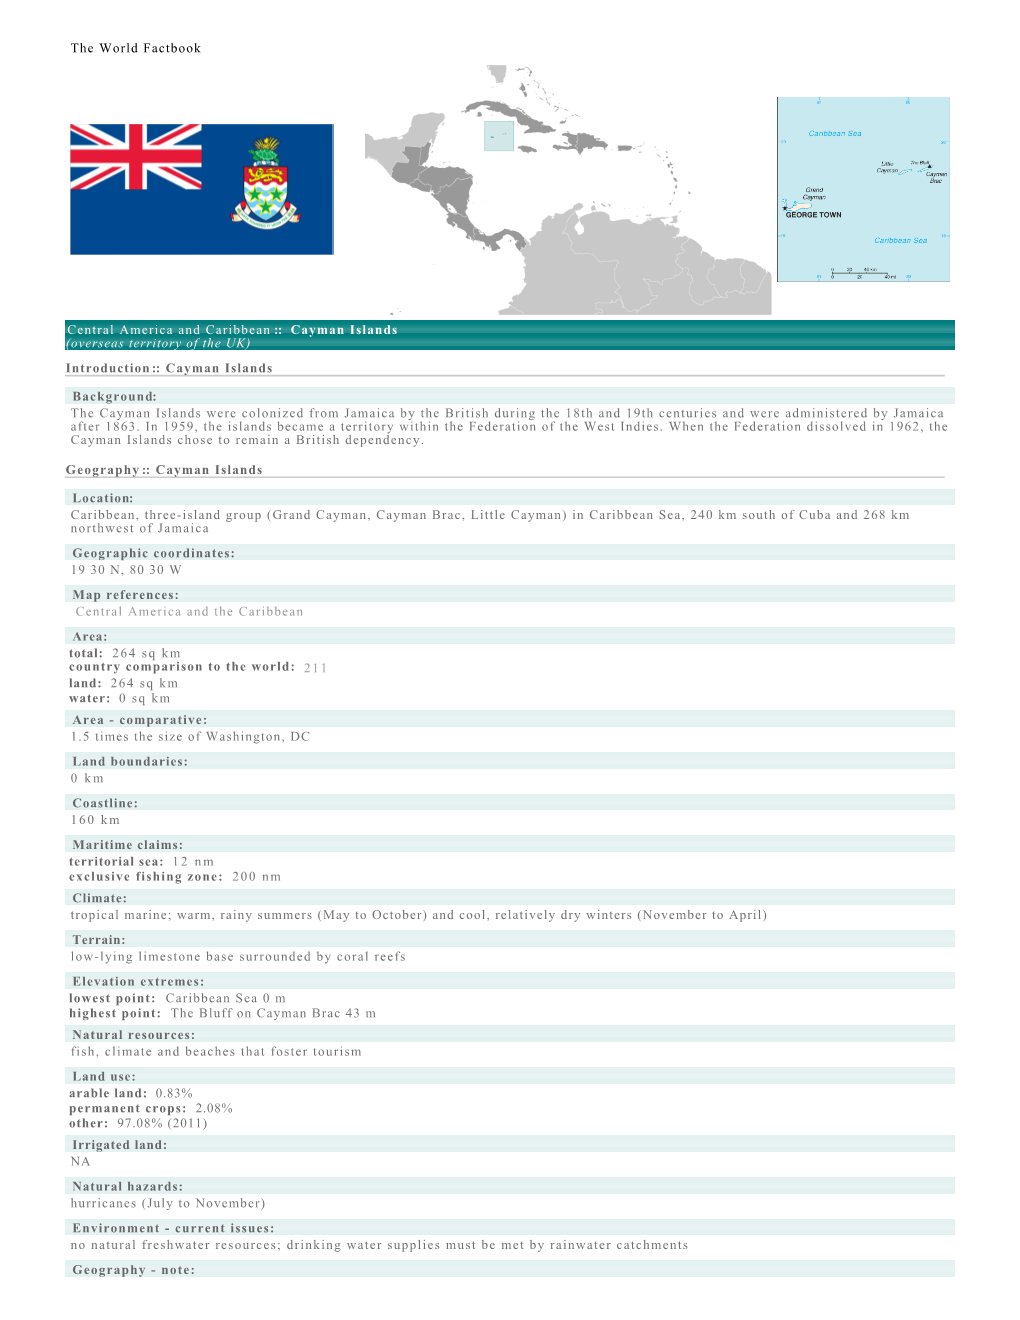 The World Factbook Central America and Caribbean :: Cayman Islands (Overseas Territory of the UK) Introduction :: Cayman Islands